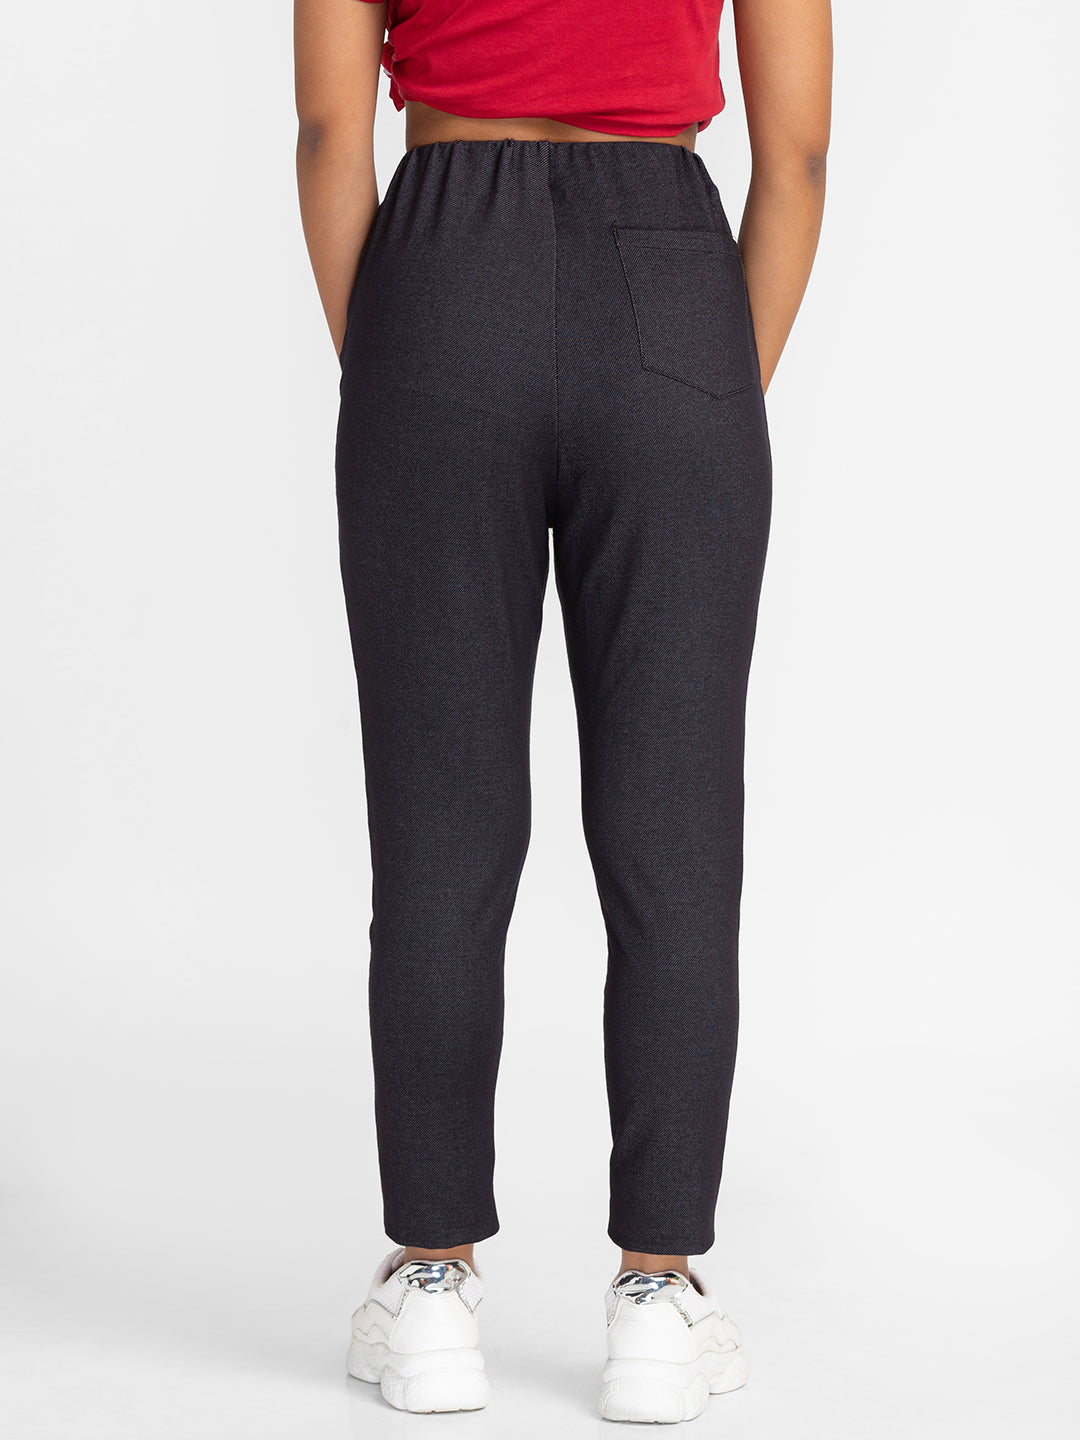 Globus Black Solid Skinny Fit Cropped Peg Trousers